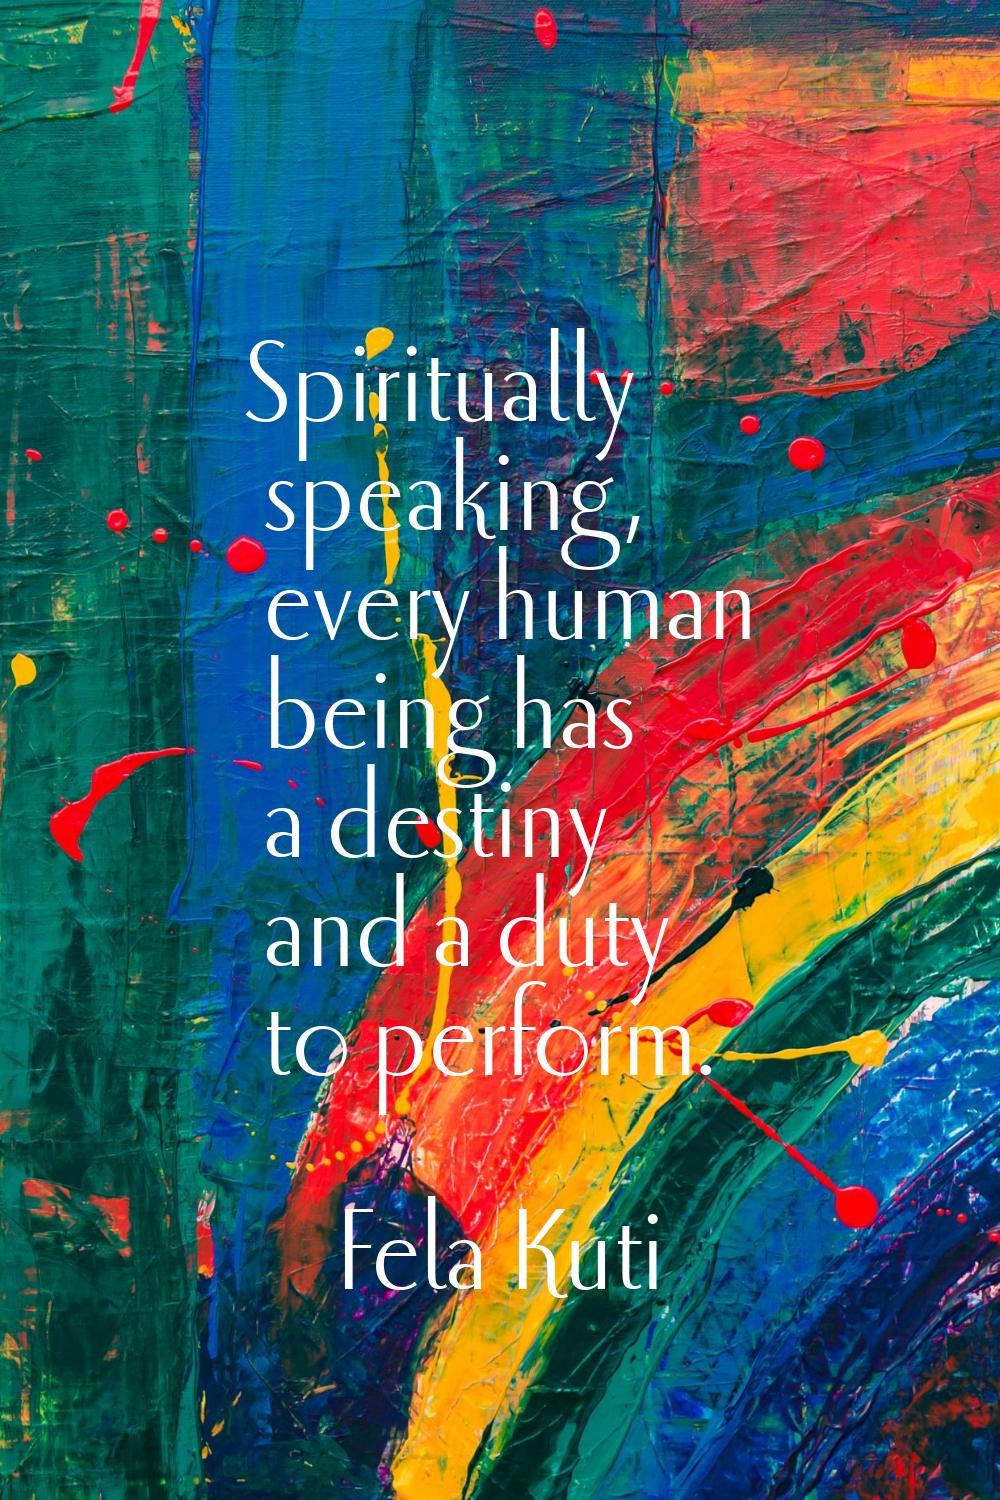 Spiritually speaking, every human being has a destiny and a duty to perform.